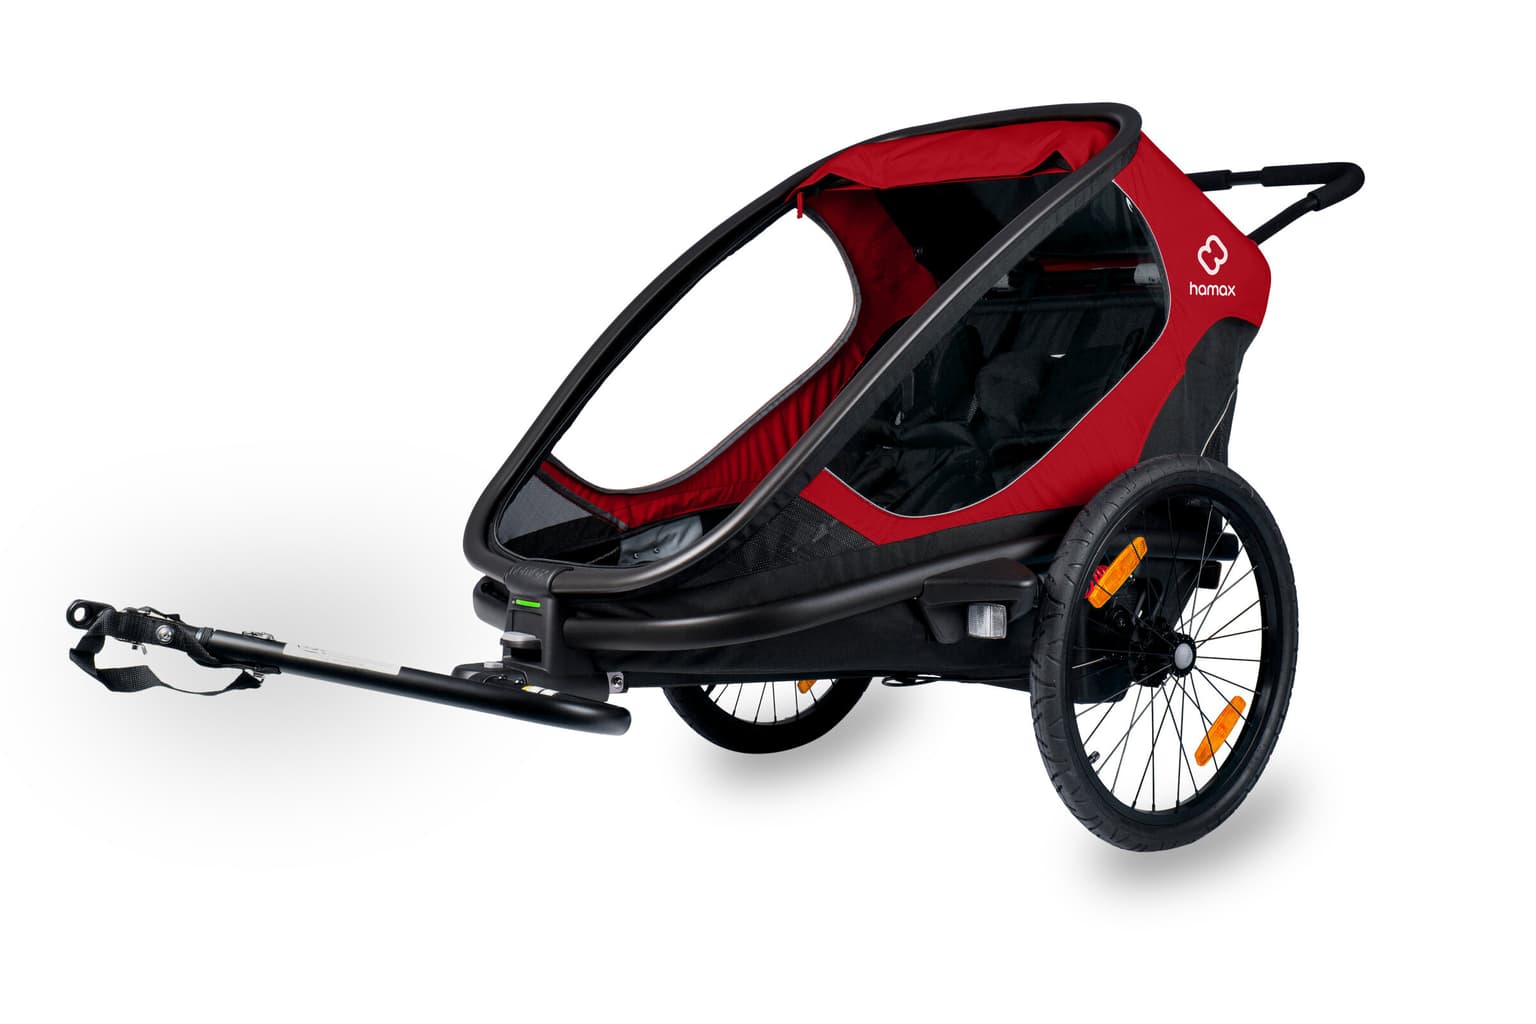 Hamax Hamax Outback 2 in 1 Remorque pour vélo rouge-fonce 3